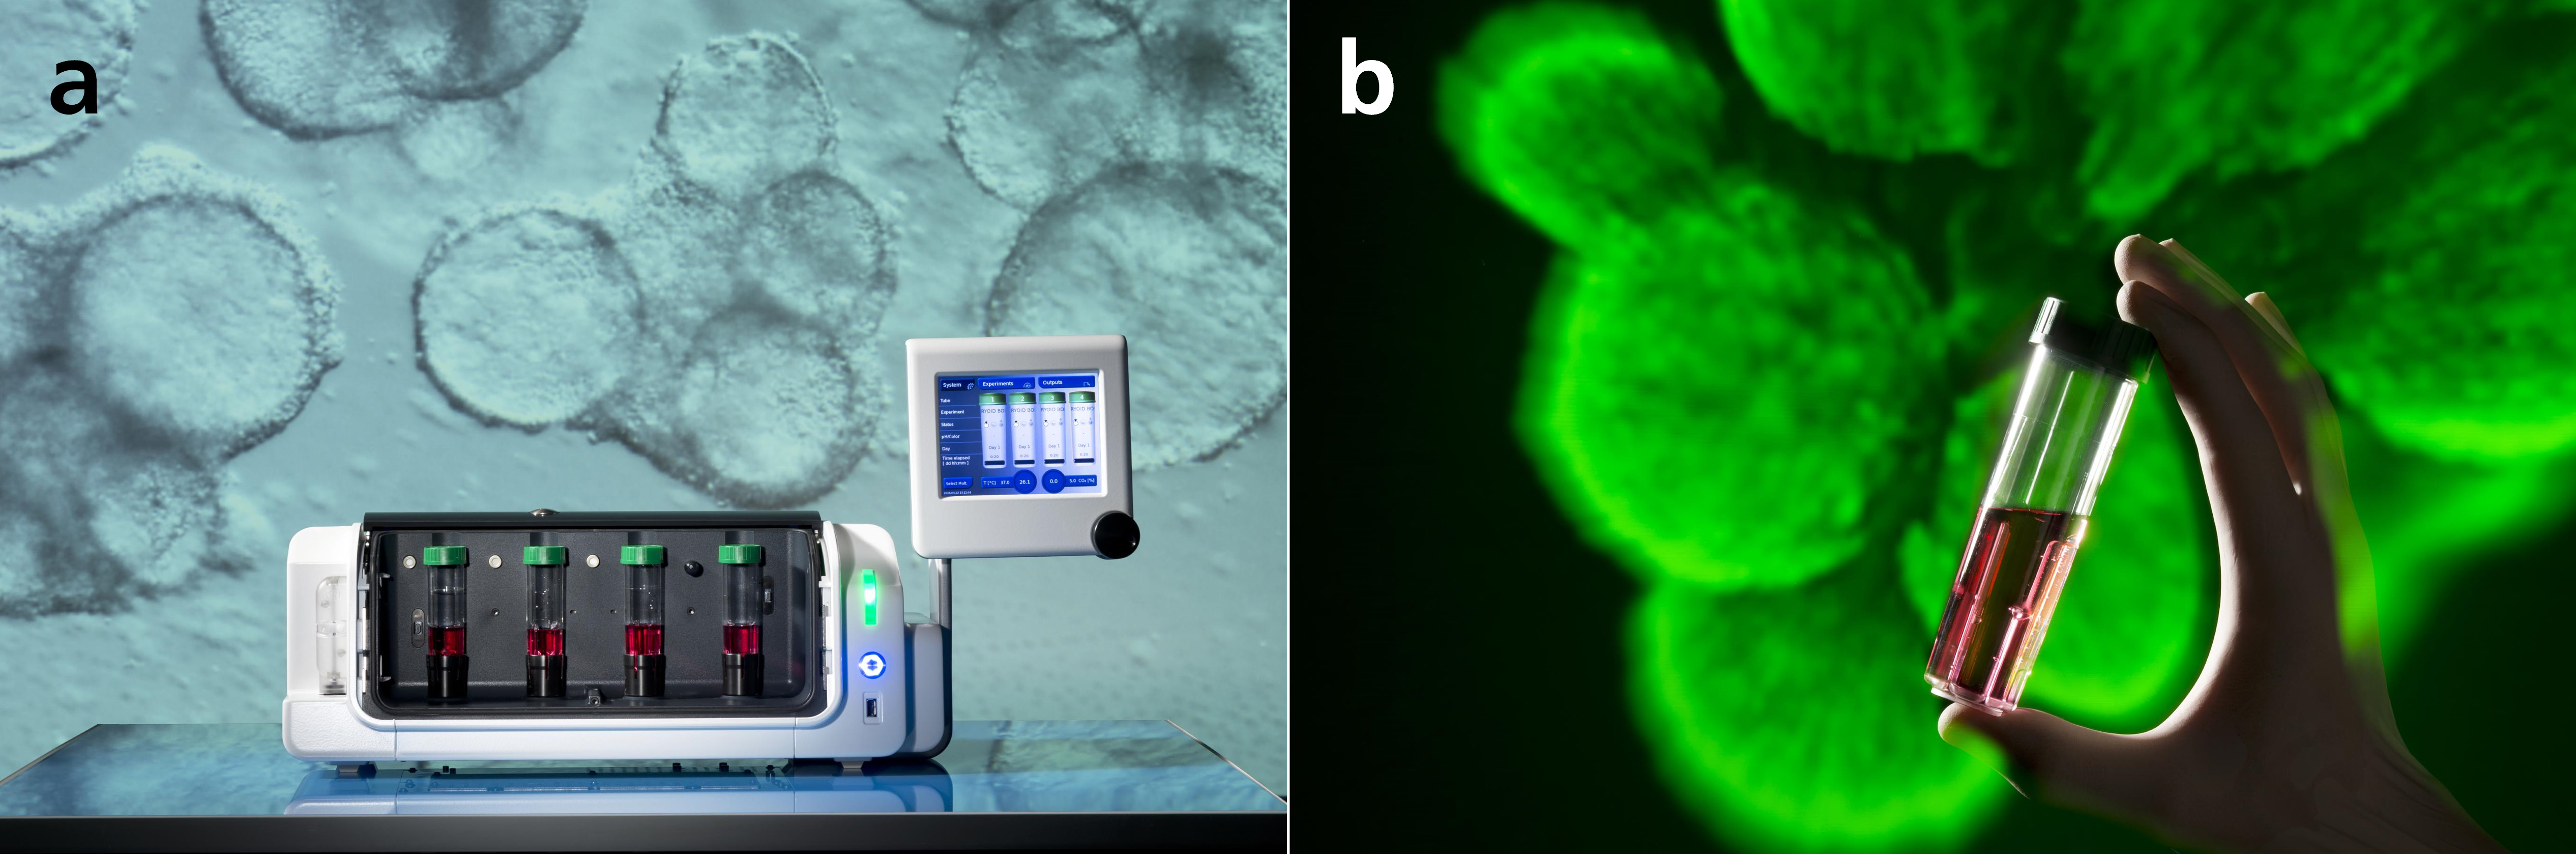 Scalable stem cell processing technology in suspension bioreactors (a). The different conditions are tested in separate cultivation tubes (b).